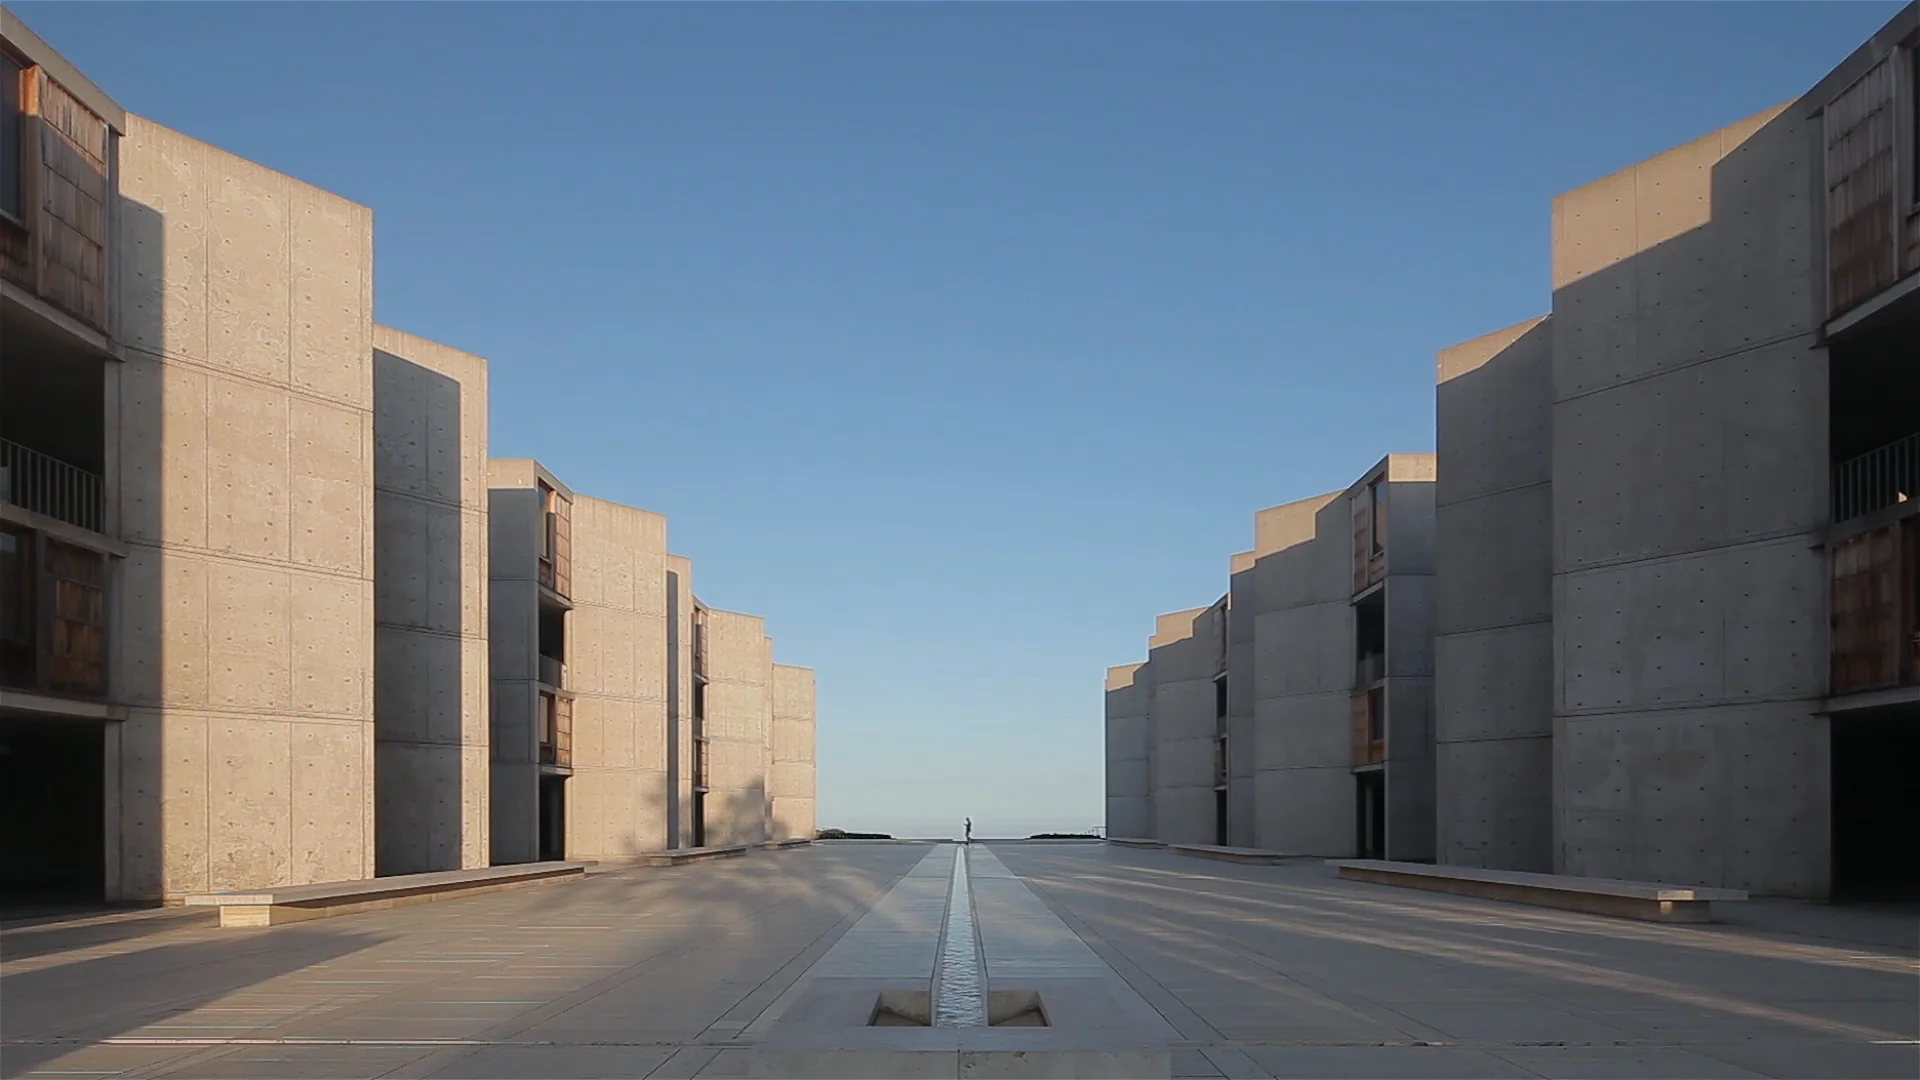 PODCAST: The Salk Institute Part 1 – Founding and Forming